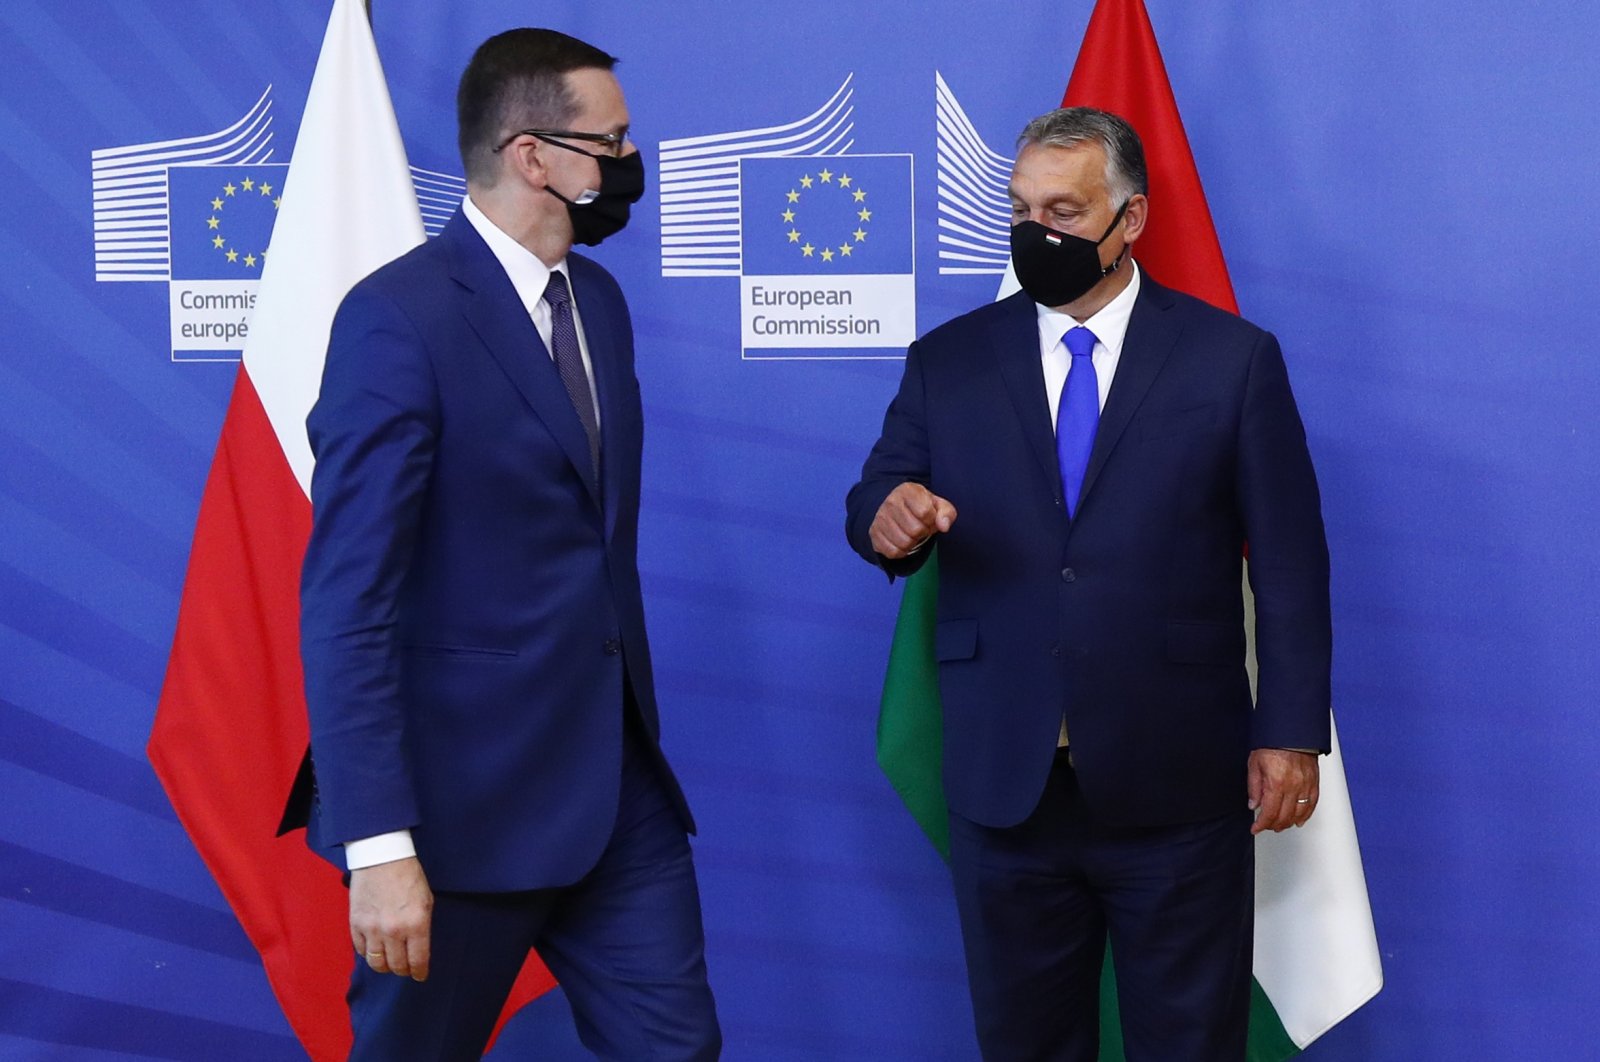 Poland's Prime Minister Mateusz Morawiecki (L) speaks with Hungary's Prime Minister Viktor Orban prior to a meeting with European Commission President Ursula von der Leyen, not pictured, and the Visegrad Group at EU headquarters in Brussels, Sept 24, 2020. (Pool via AP)